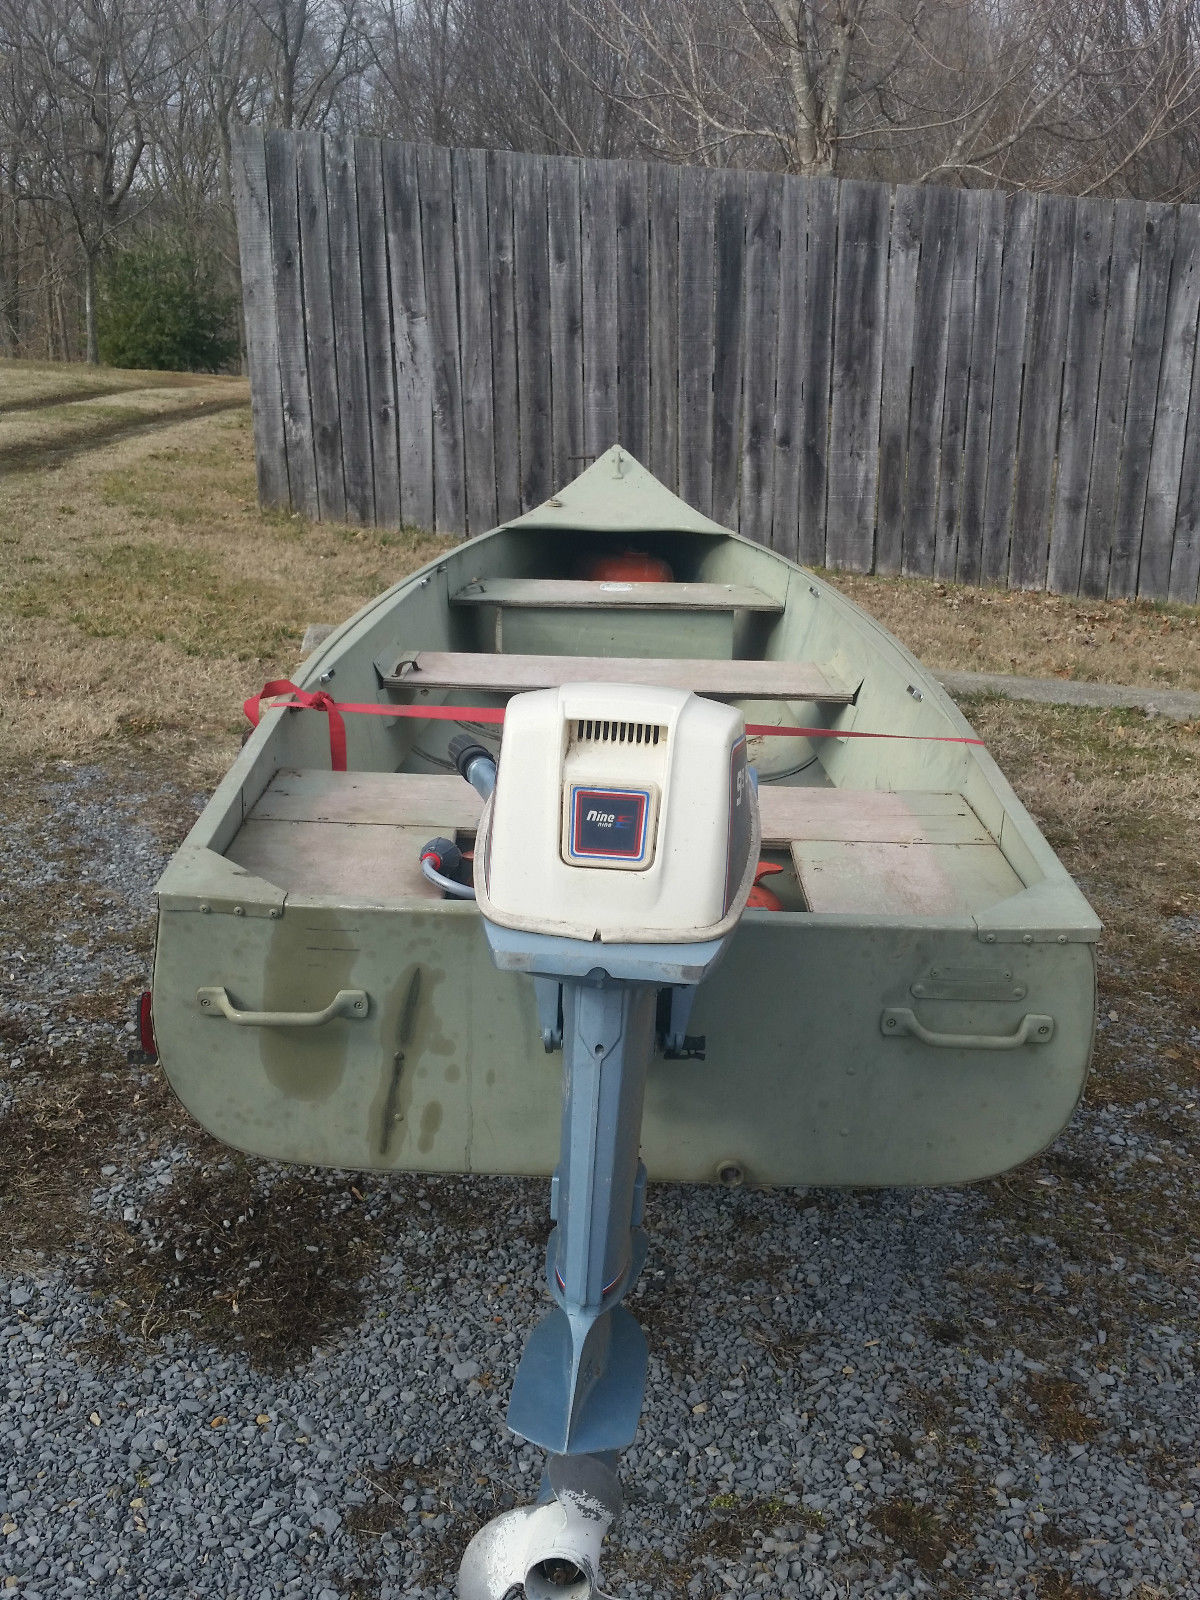 Lund Snipe 1979 for sale for $1,700 - Boats-from-USA.com